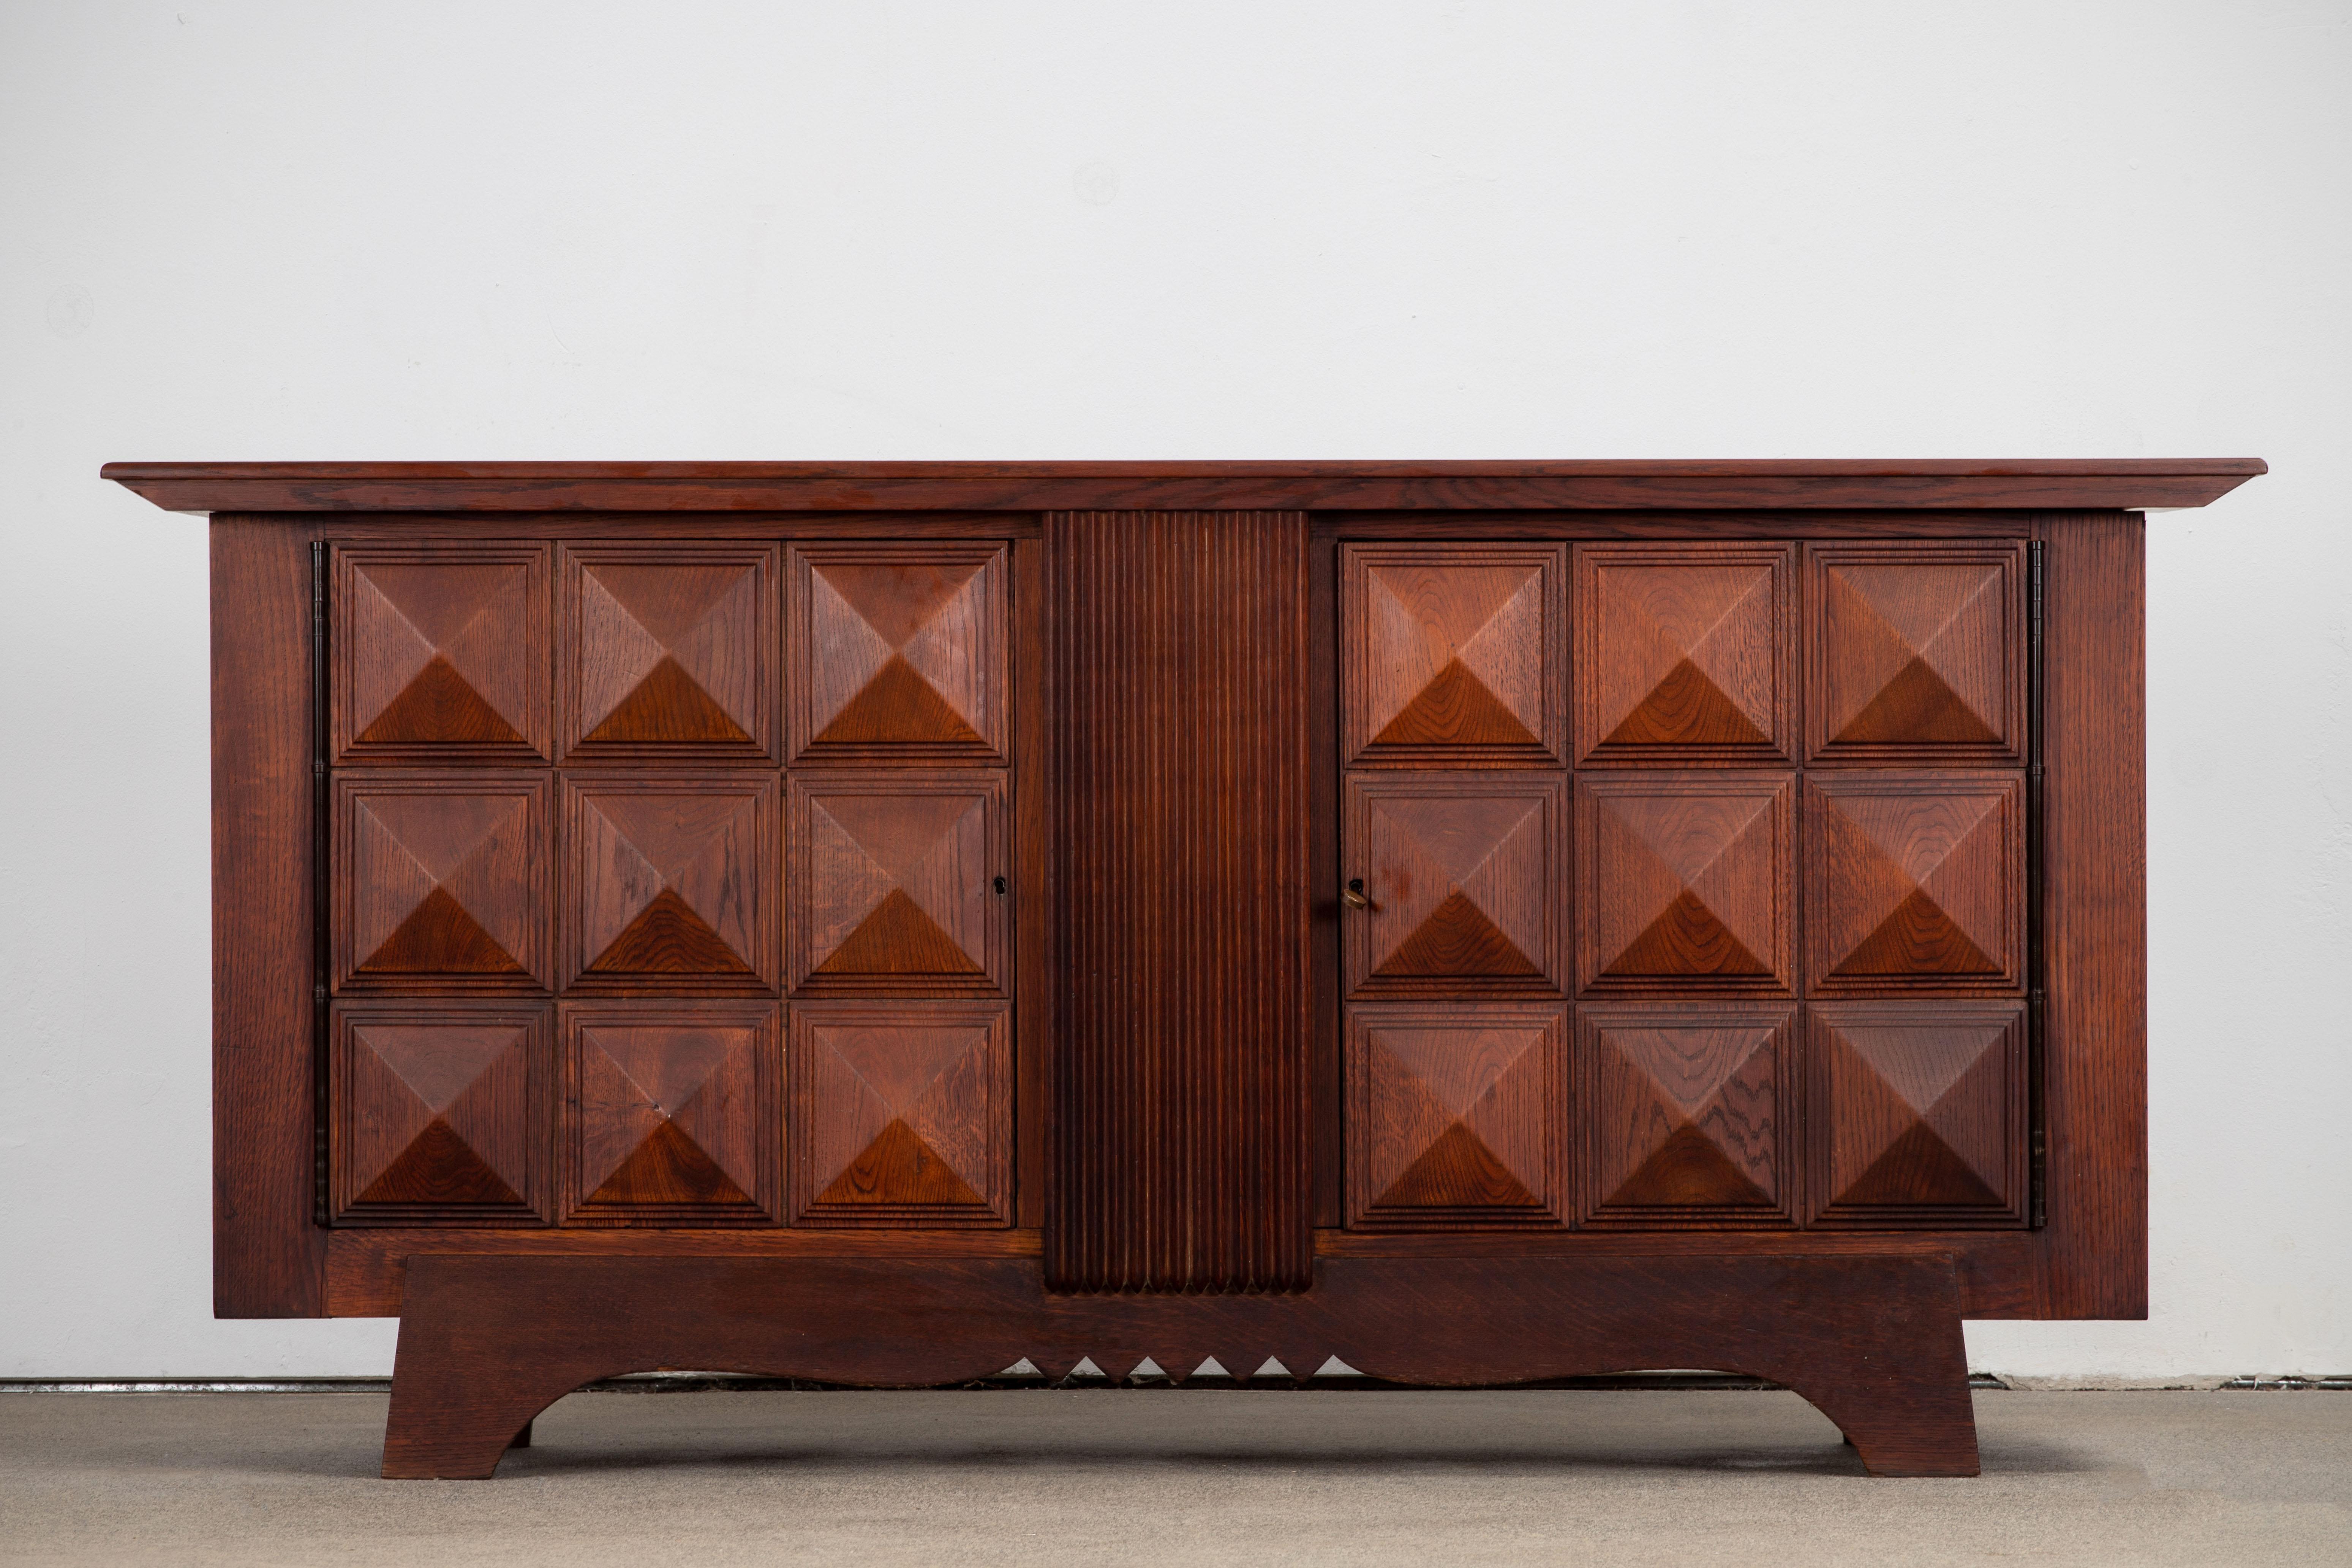 Credenza, solid oak, France, 1940s.
Large Art Deco Brutalist sideboard. This heavy Brutalist credenza seems to float on its elegant base. The credenza consists of two large storage facilities and covered with very detailed diamond designed door